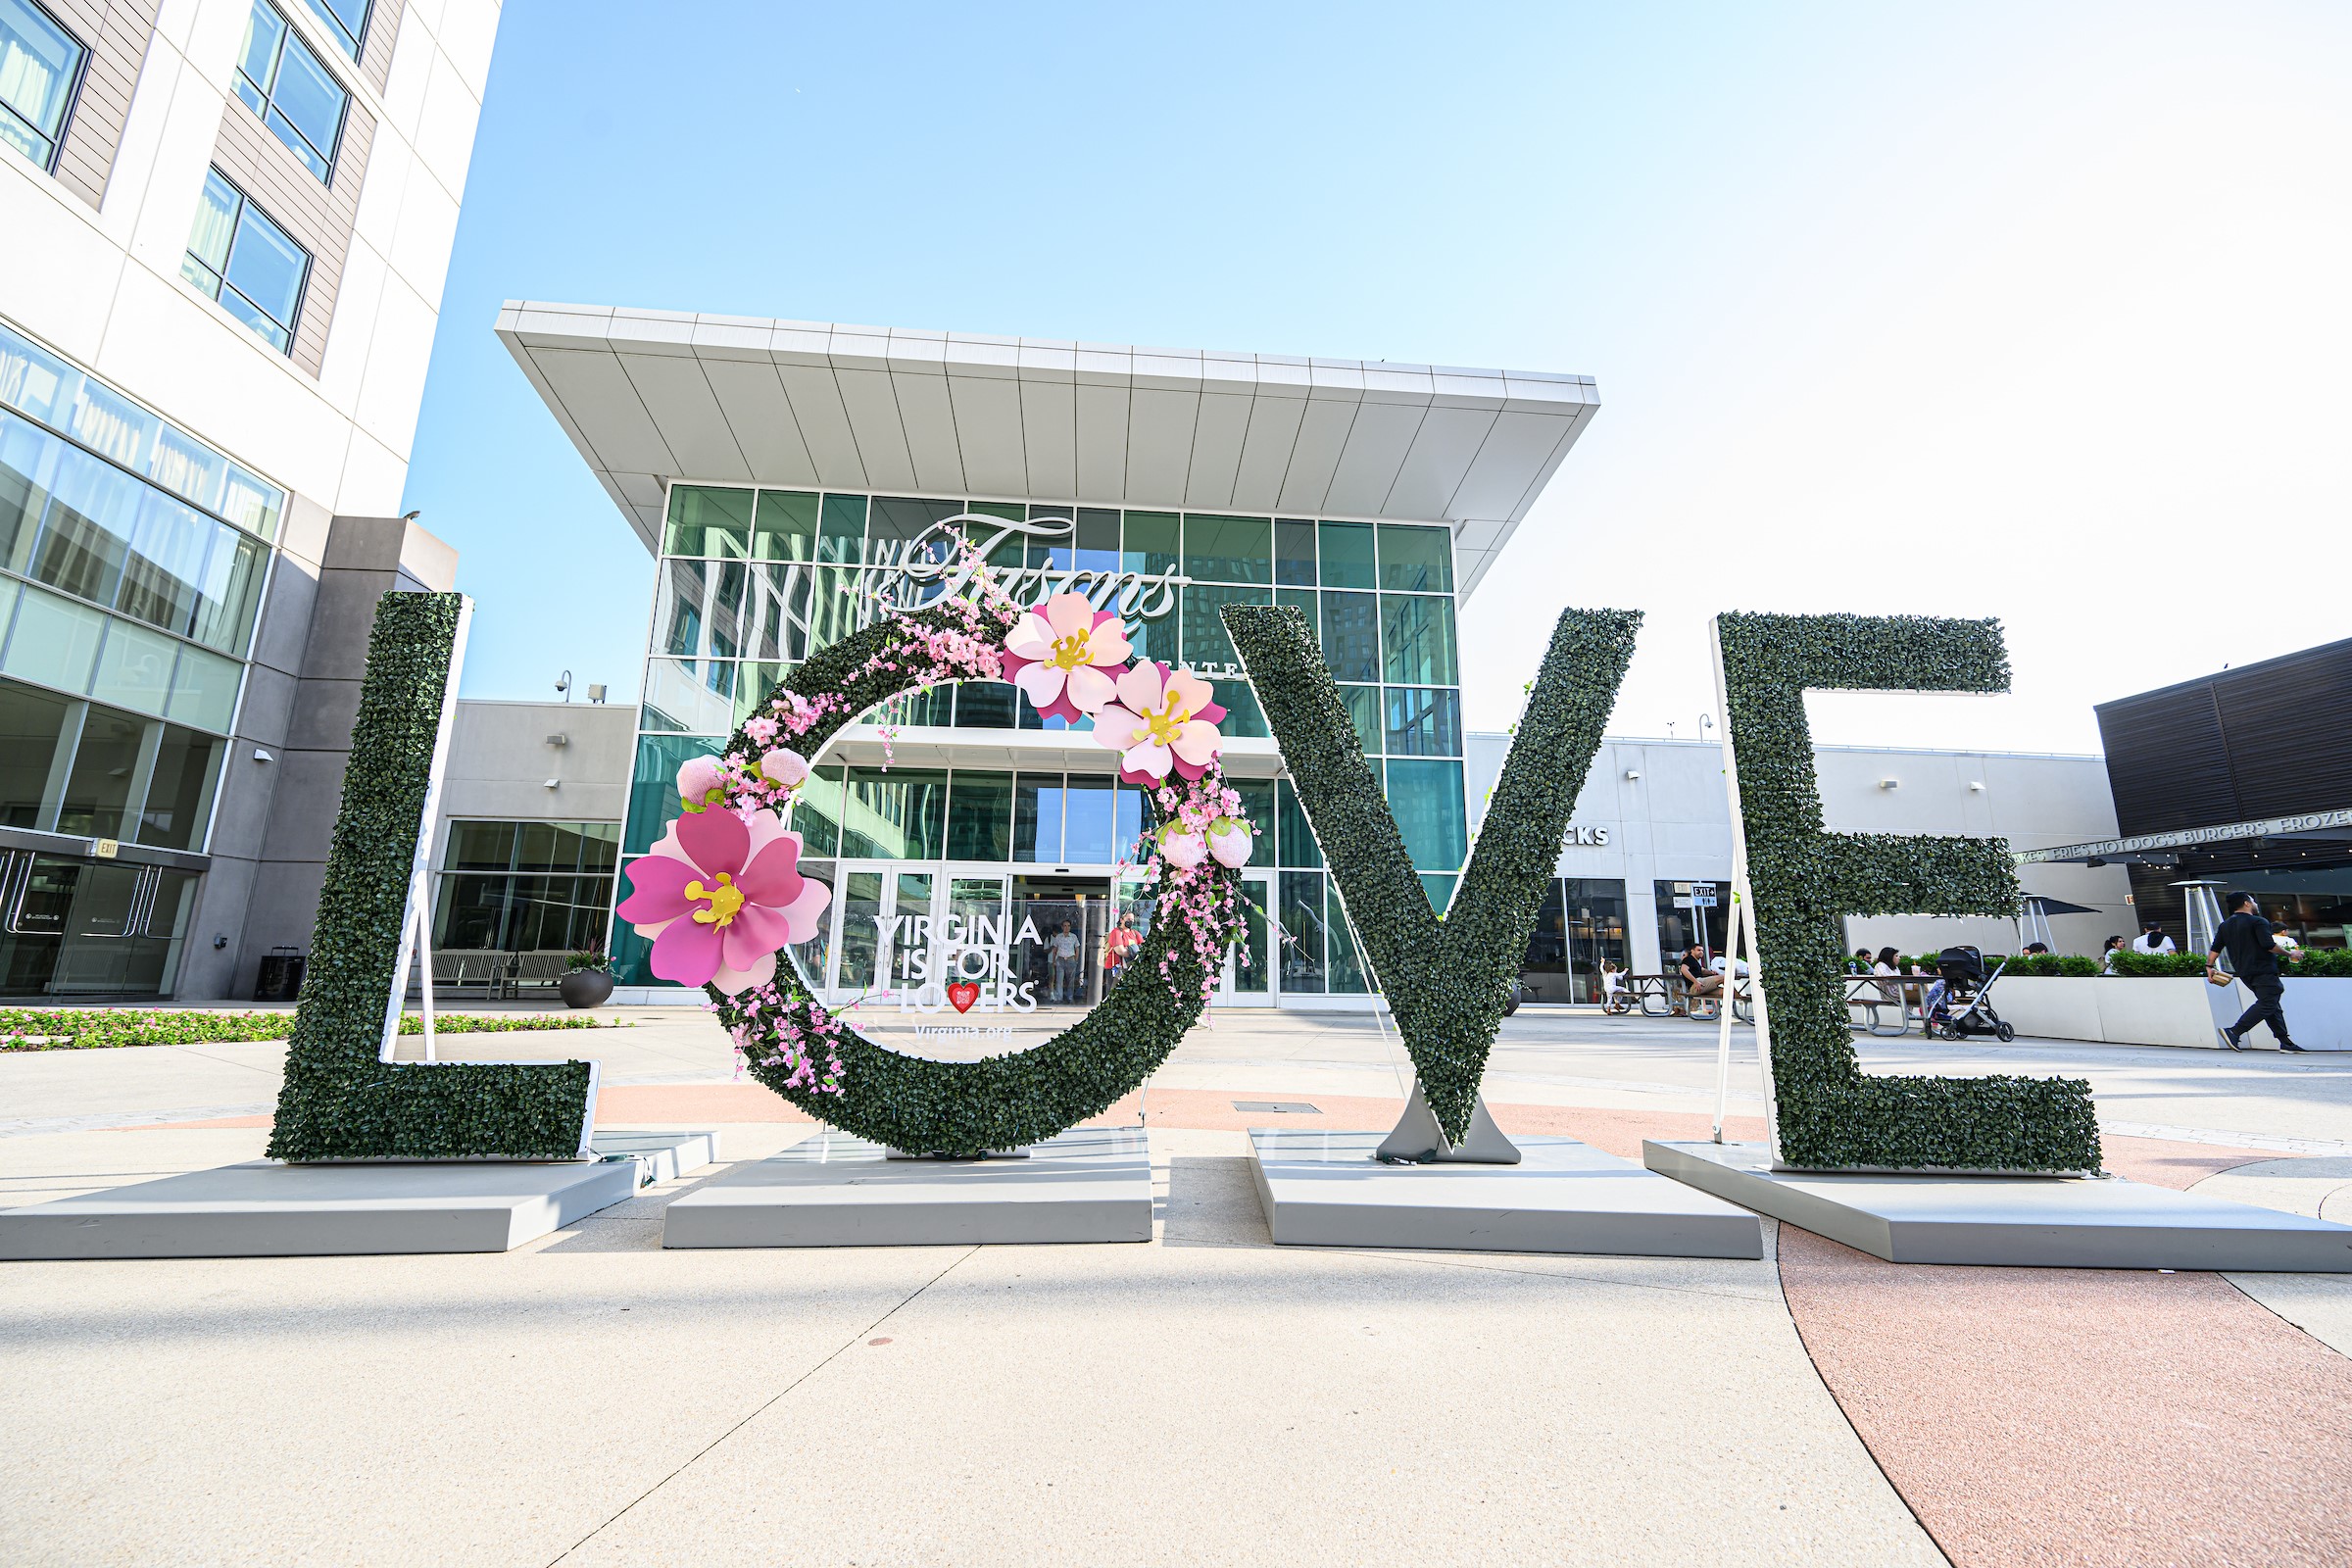 L-O-V-E sign with a spring floral decorated "O"